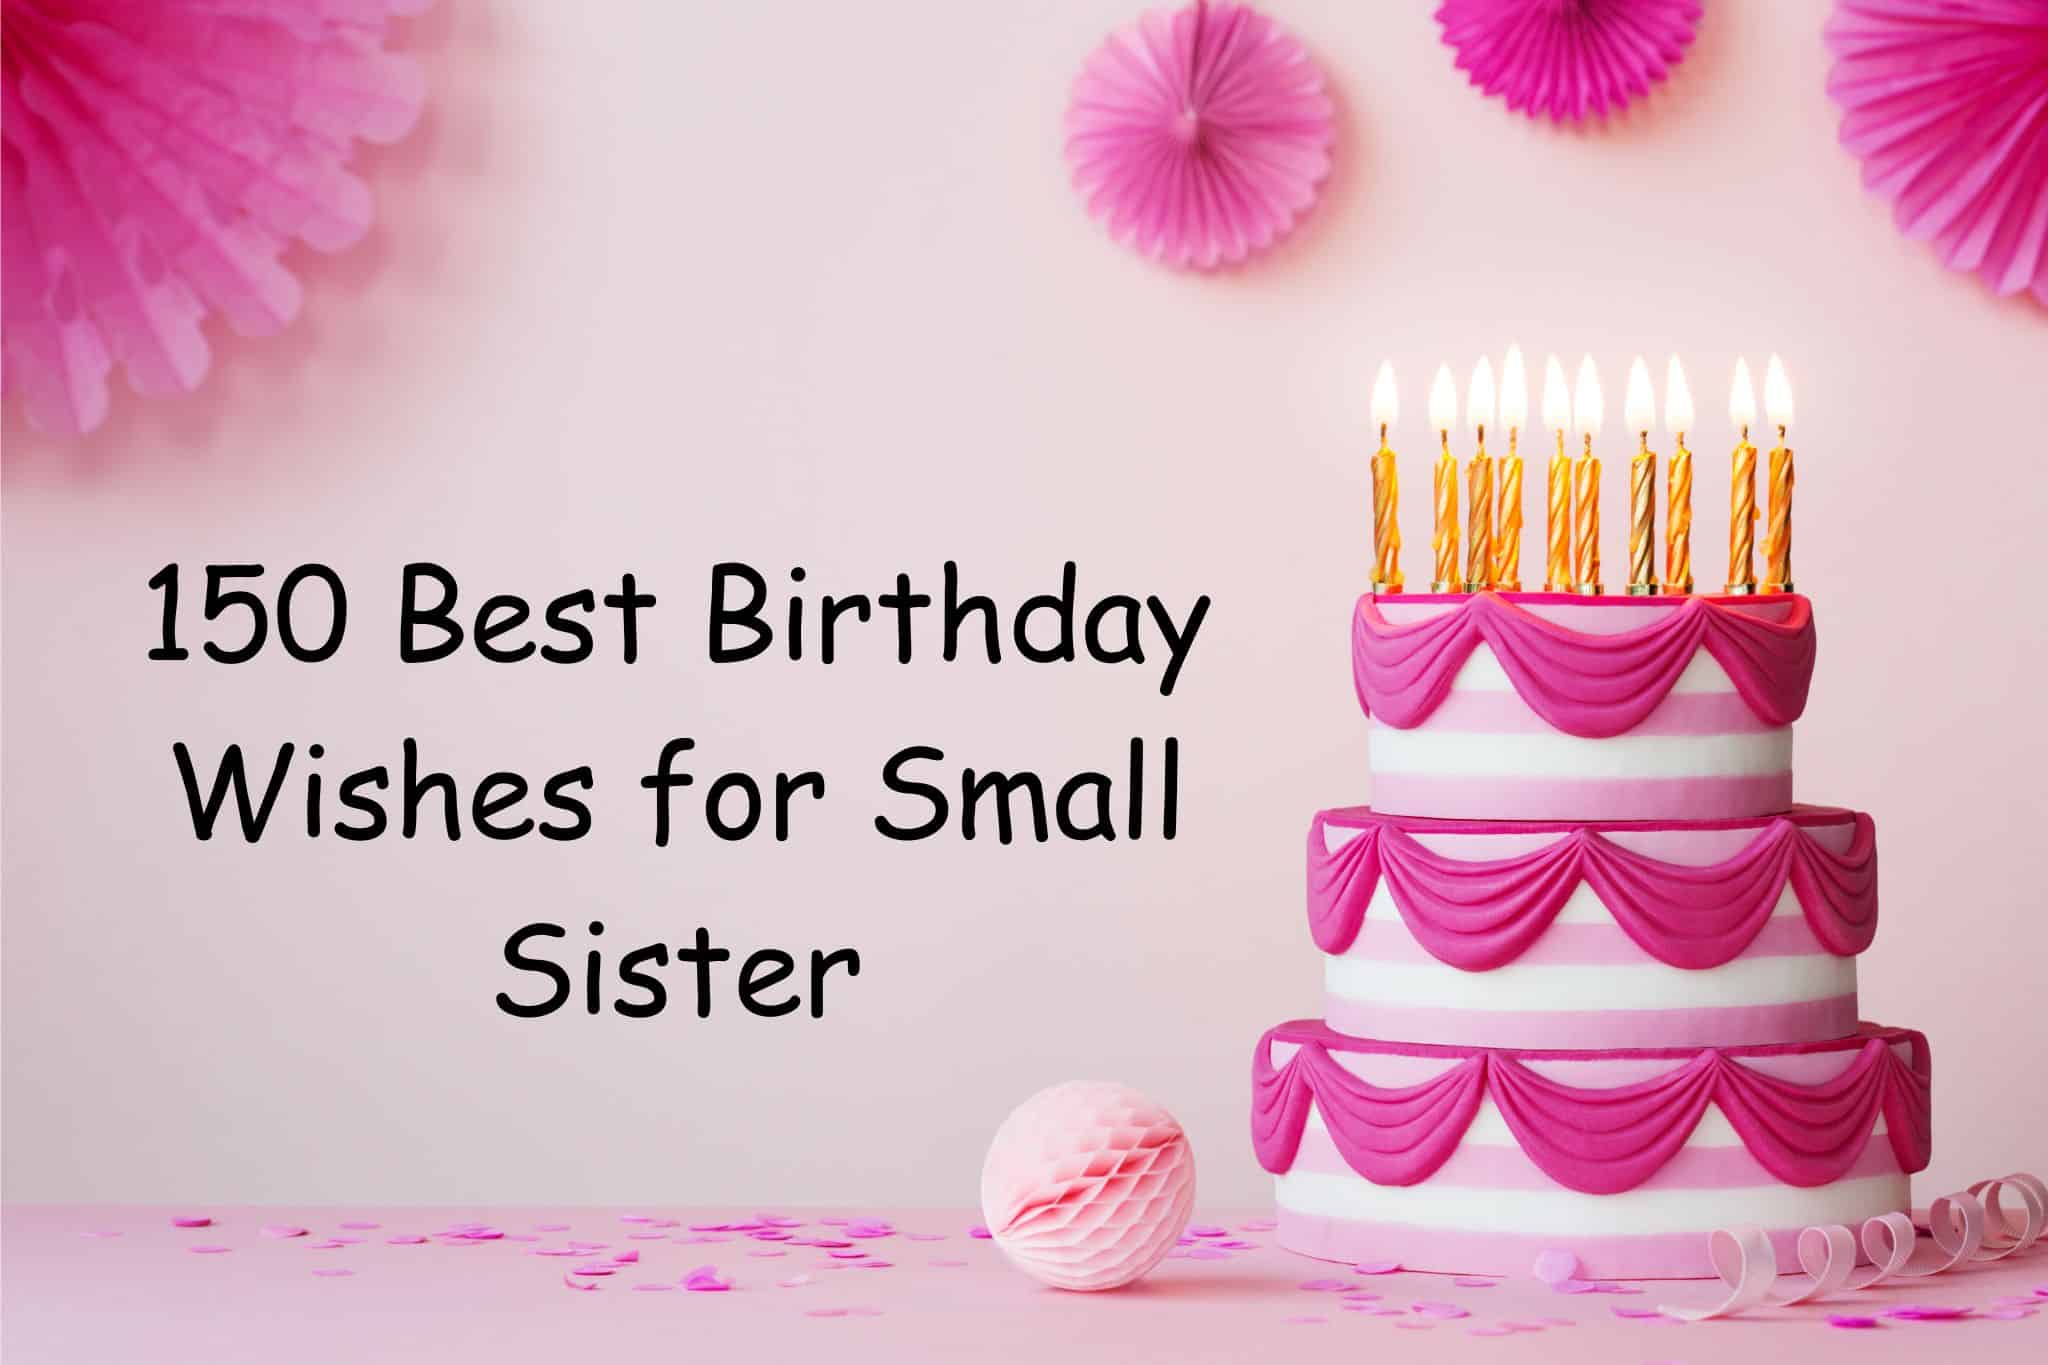 150 Best Birthday Wishes for Small Sister - MOM News Daily